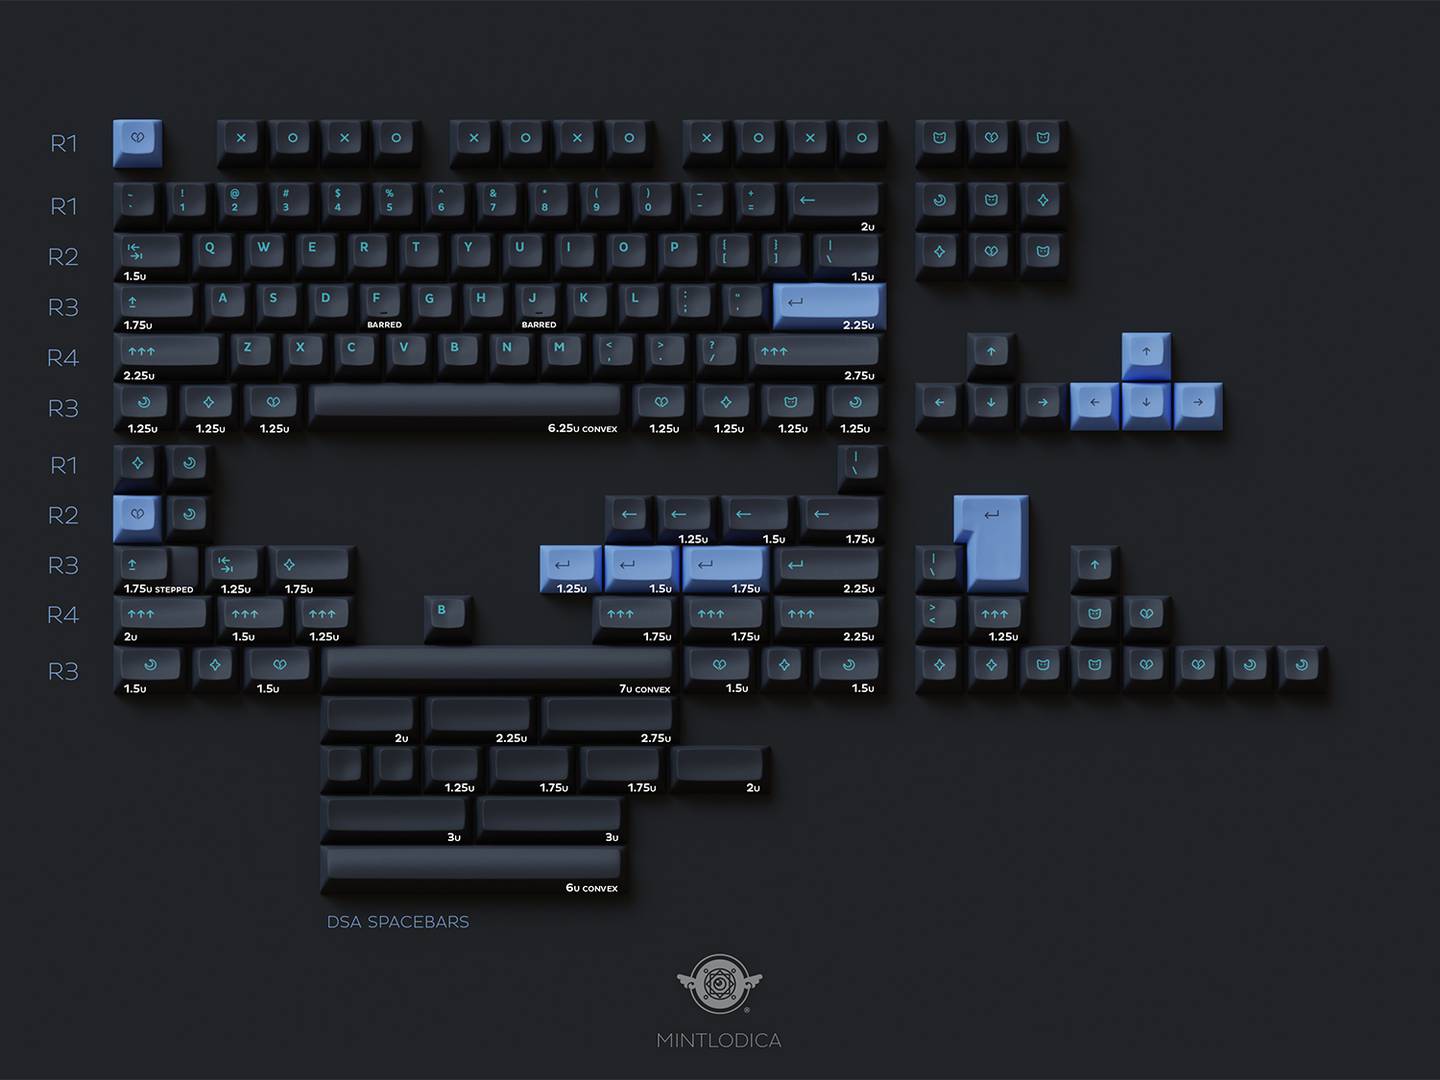 DSS Sad Girl keycaps render. Featuring Base Kit fits most TKL, 75%, 65%, 60%, and many 40% Ortho layouts. Enthusiast typists will find what they need to fill out macro rows, tiny boards, and so many spacebars!
